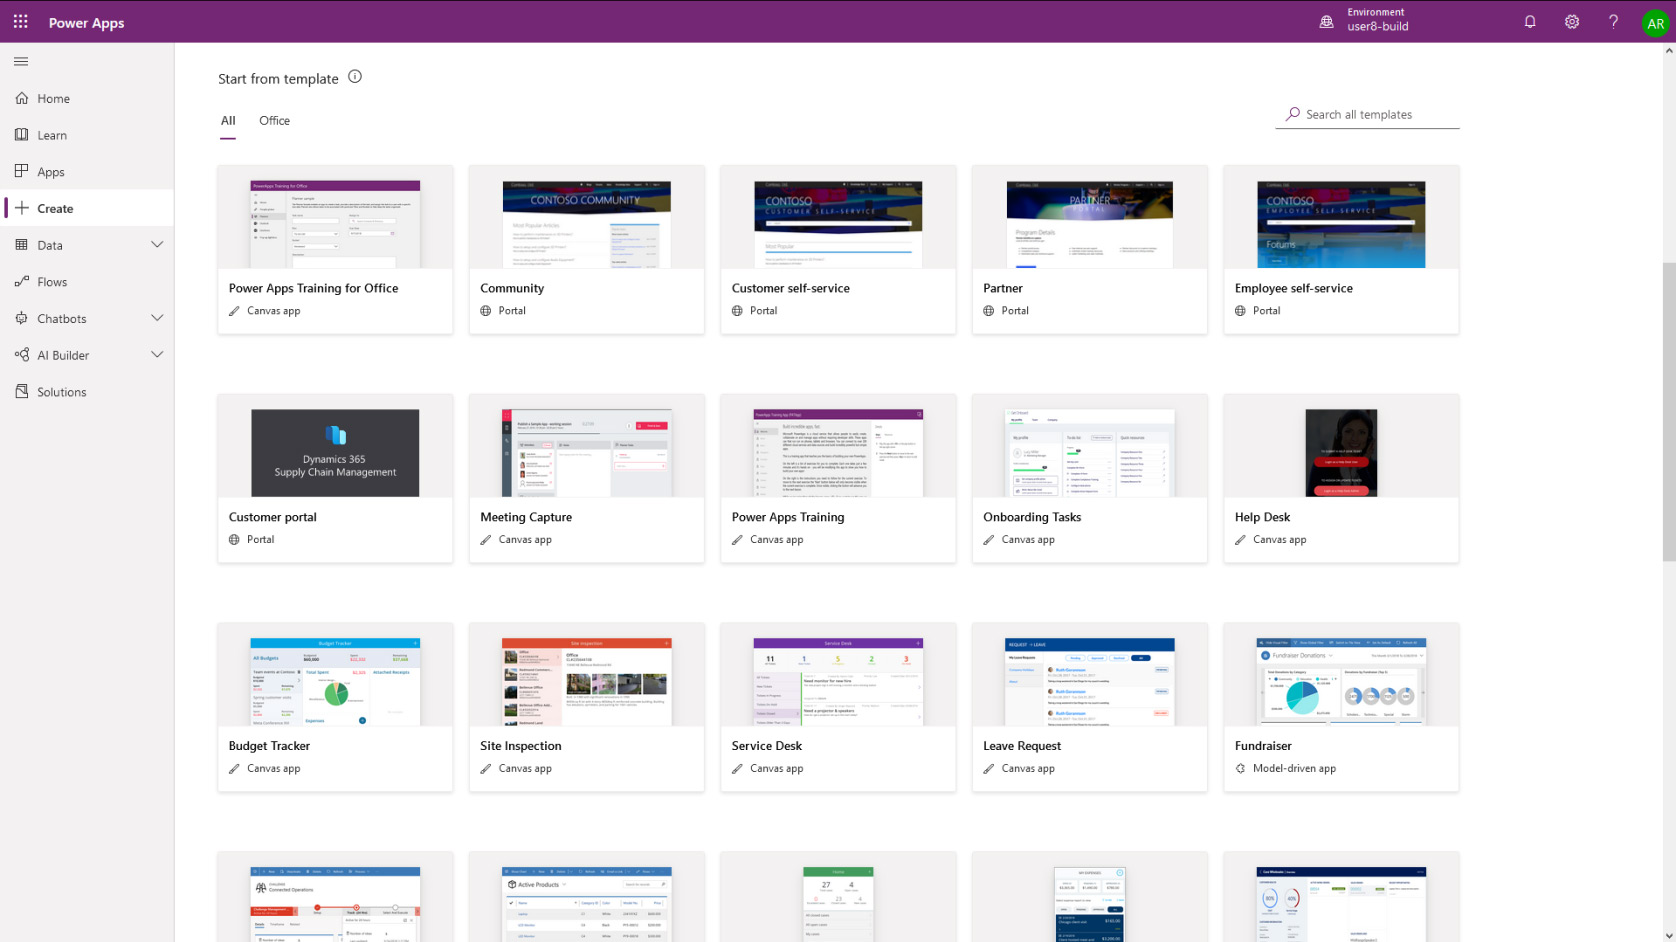 Microsoft Power Apps built-in templates